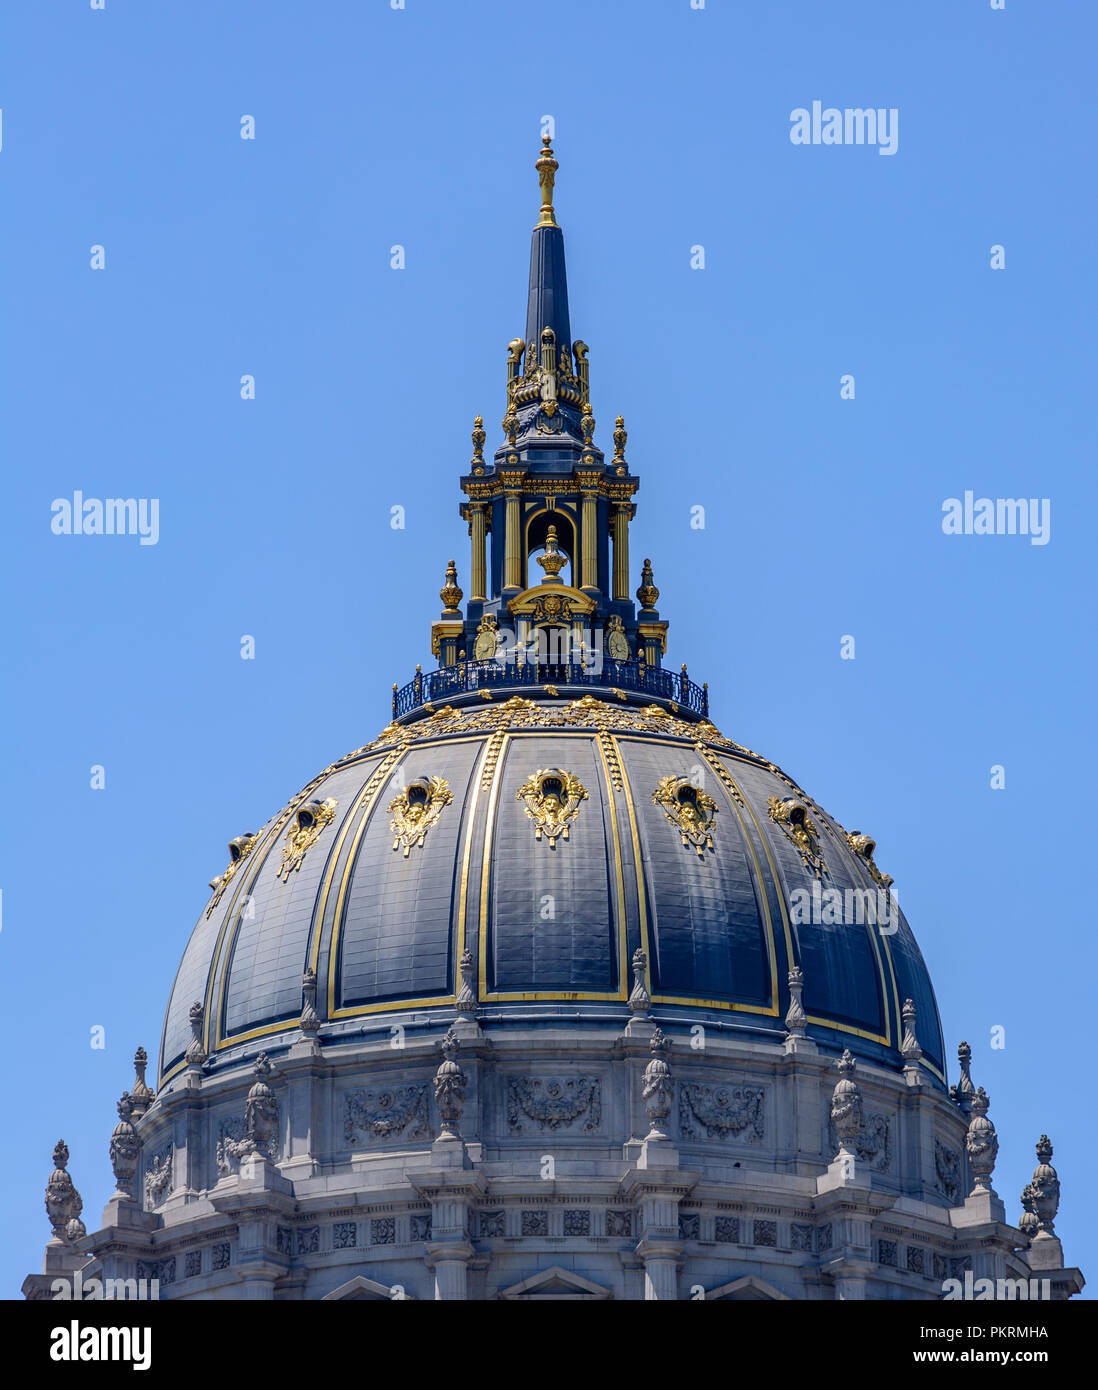 The Amazing Gold-Gilded Dome Of San Francisco City Hall With A Blue Background Stock Photo